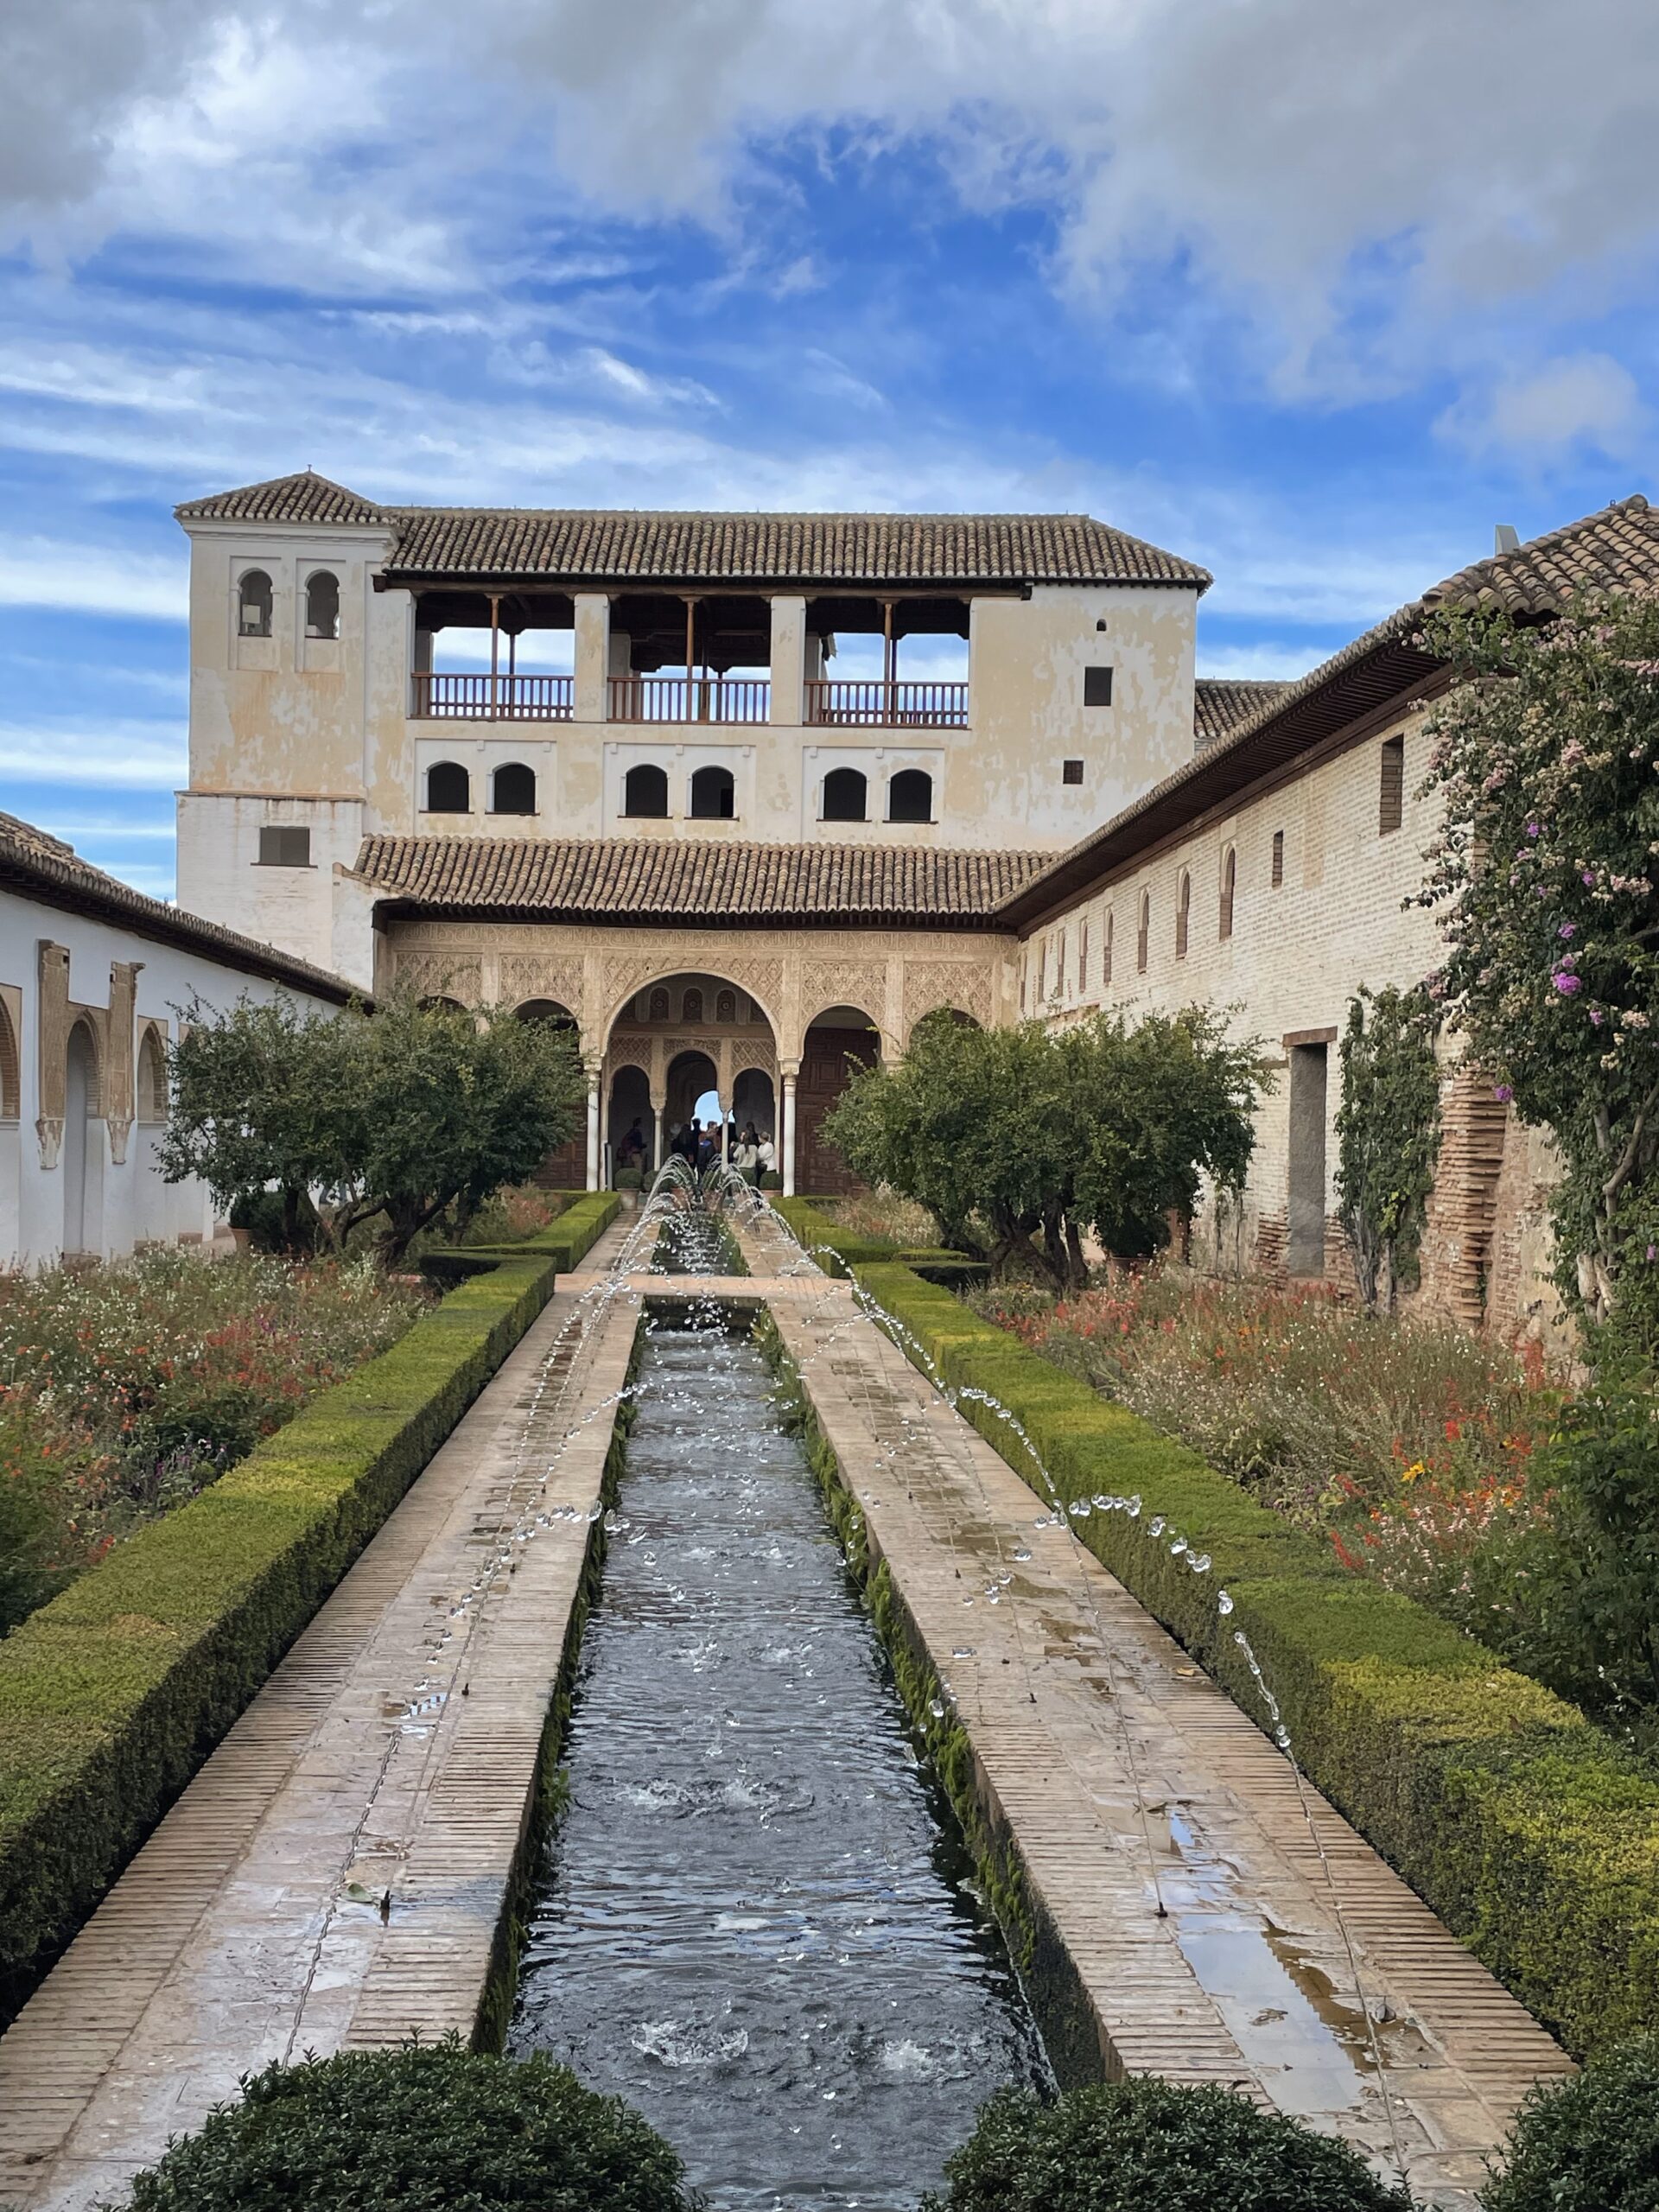 The Patio de la Acequia or Patio of Water Channel is a patio in the Generalife in the Alhambra Complex, in Granada, Spain. It is probably the oldest garden